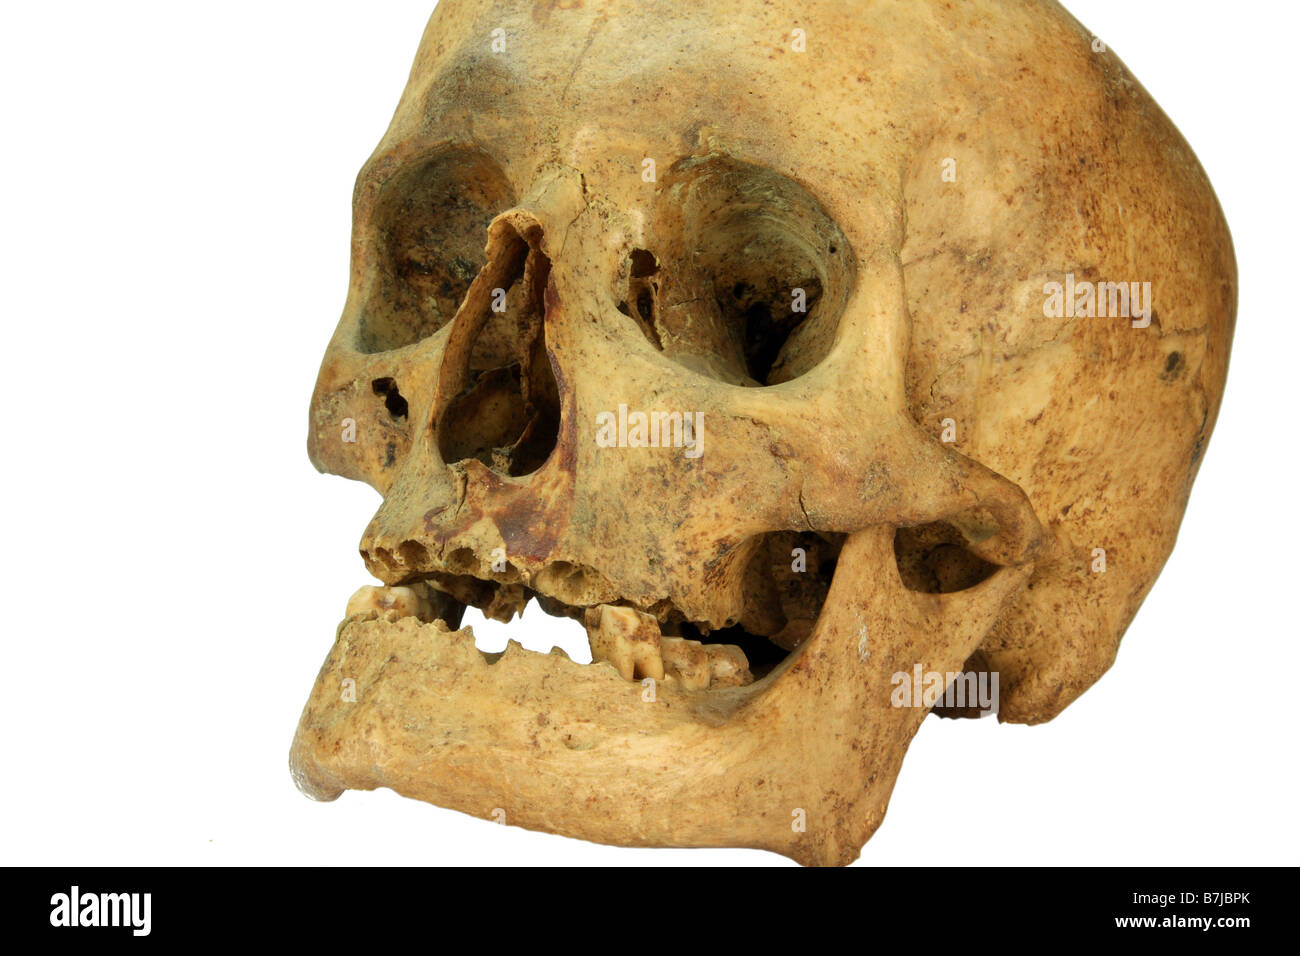 a skull of an female person isolated over white Stock Photo